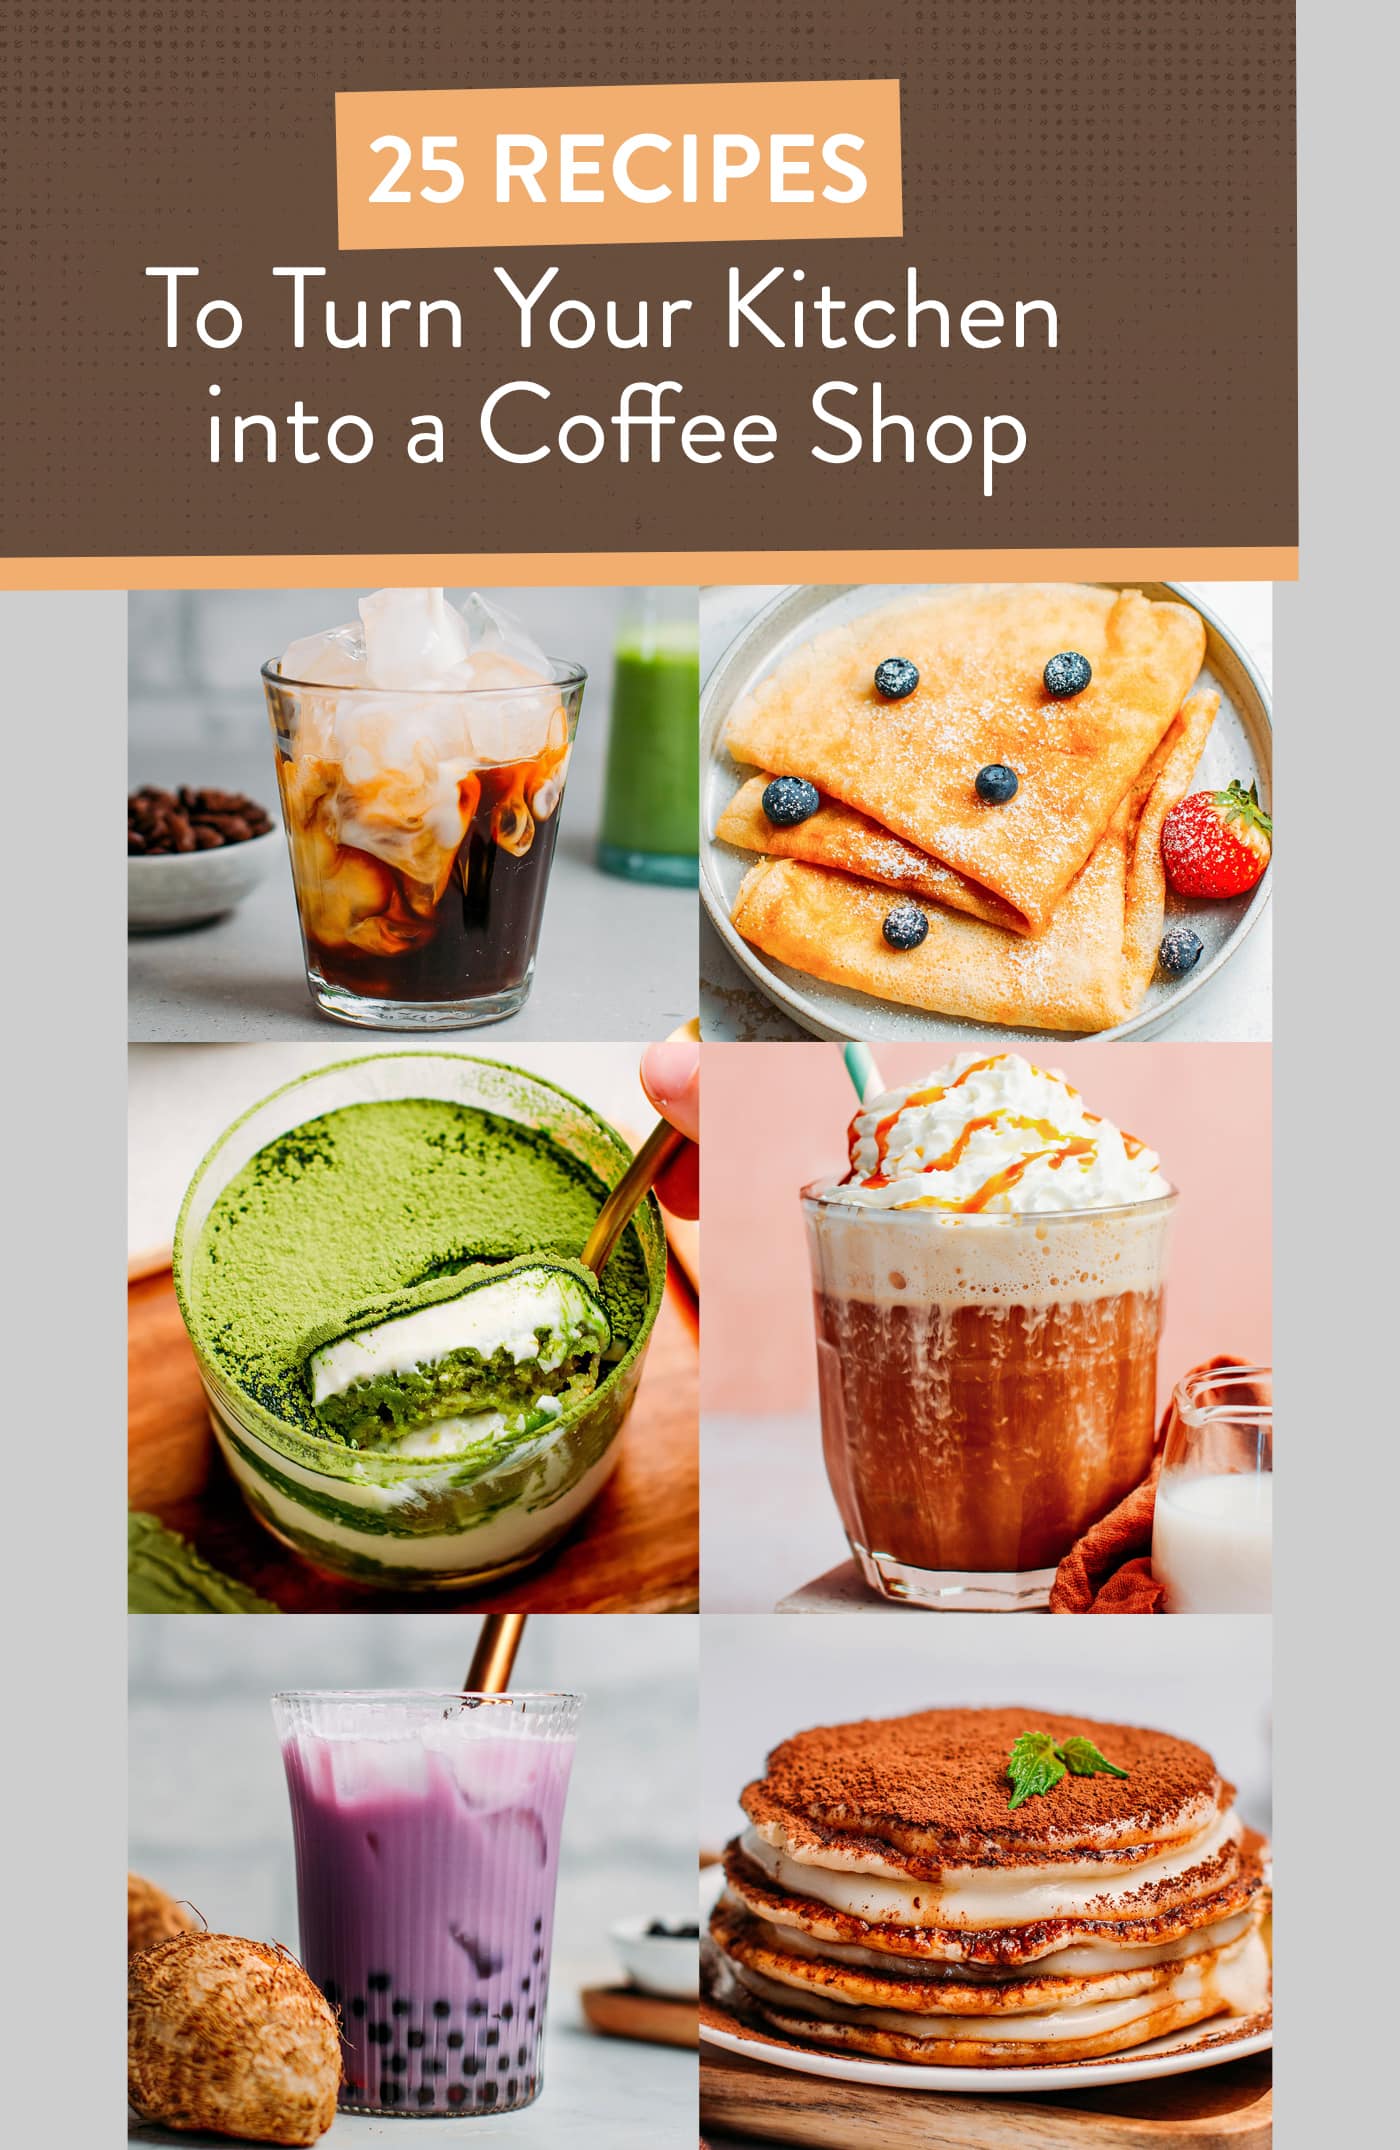 25 Recipes To Turn Your Kitchen into a Coffee Shop